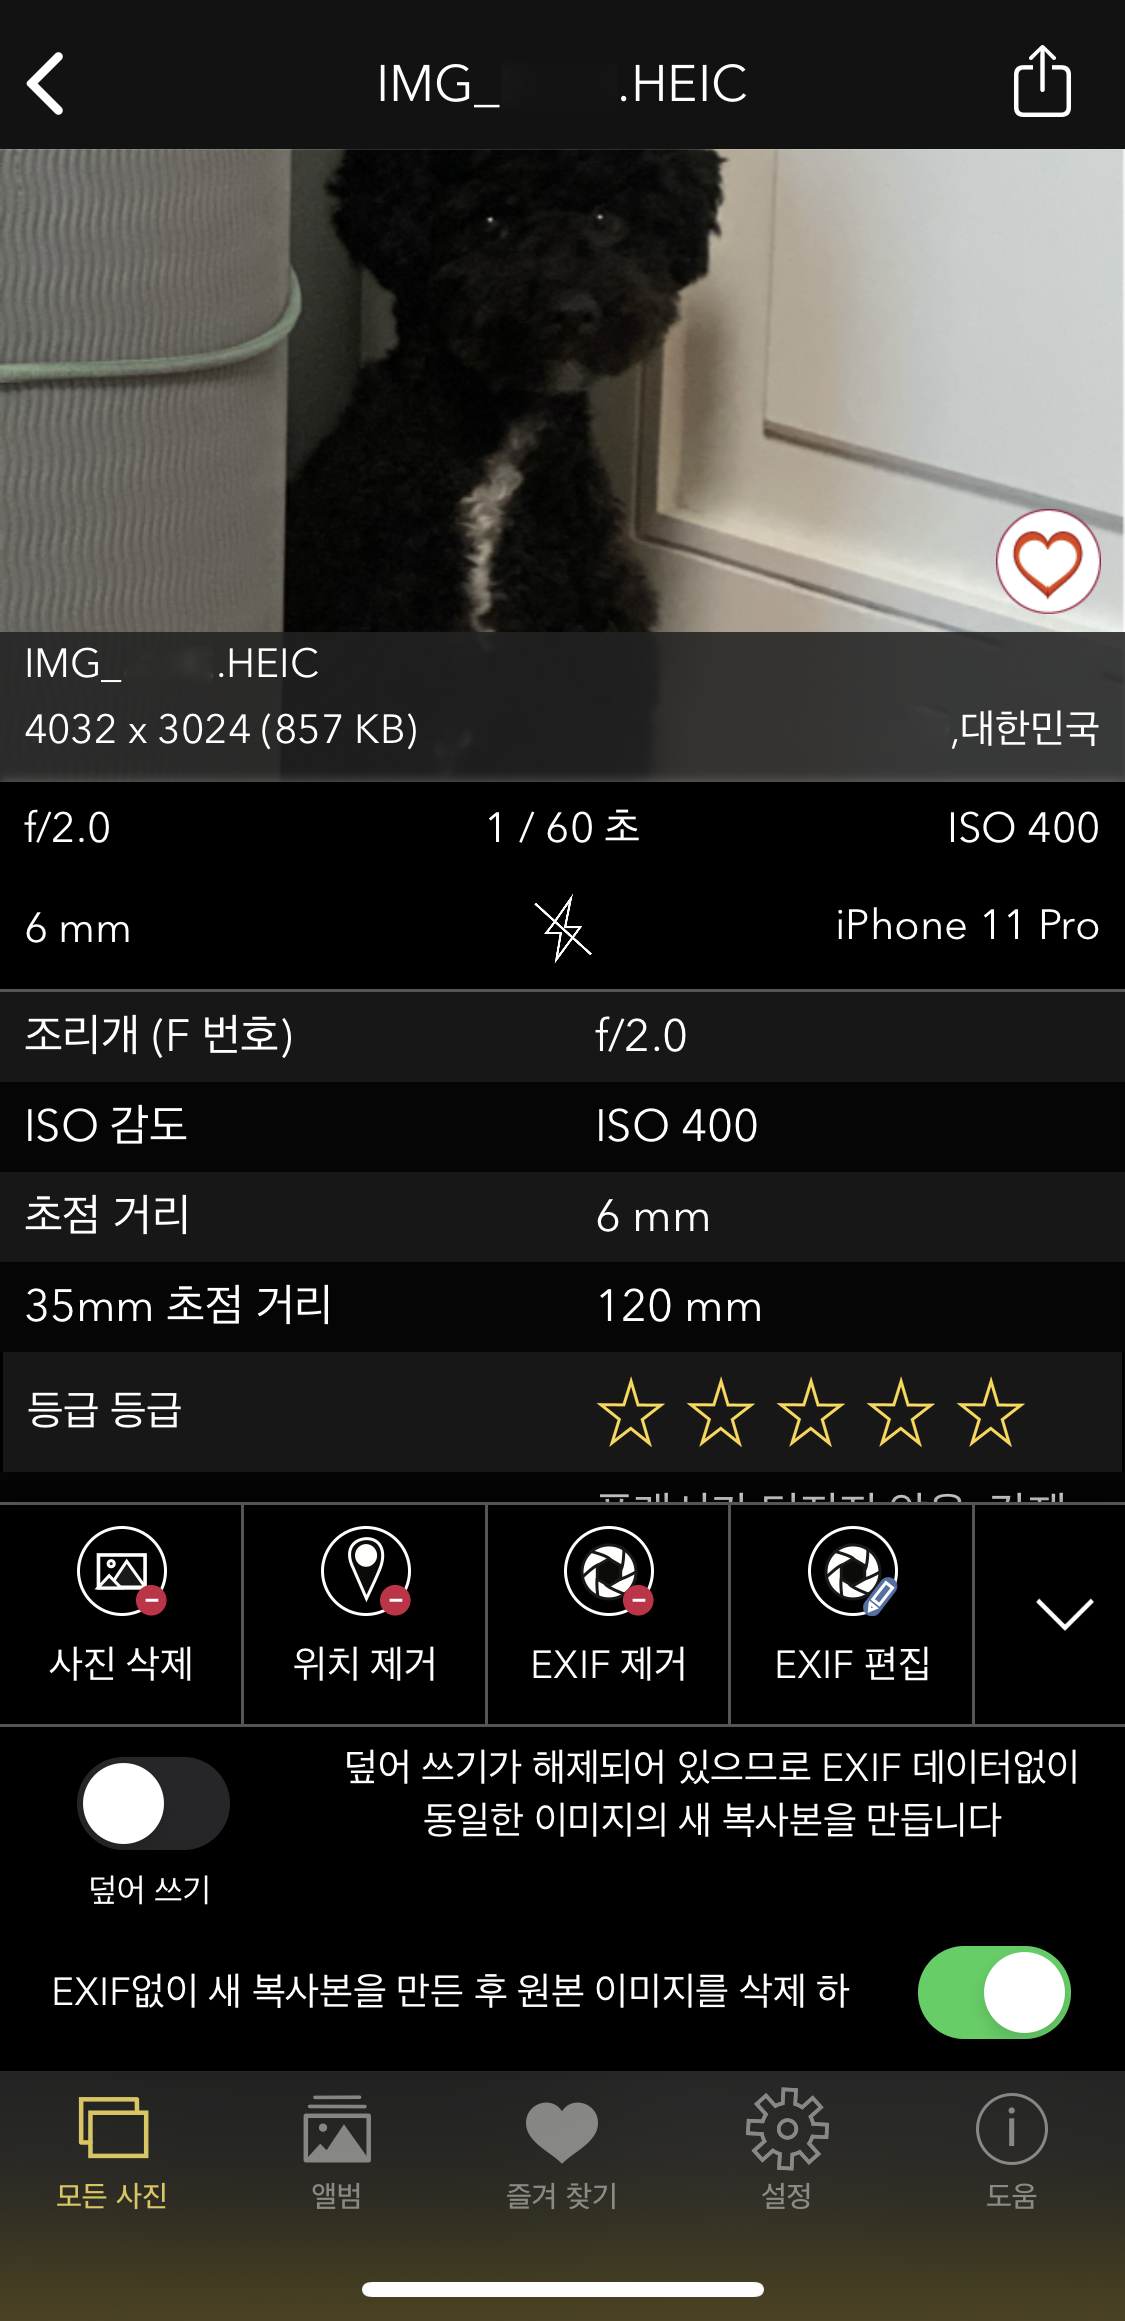 EXIF viewer - EXIF 보기